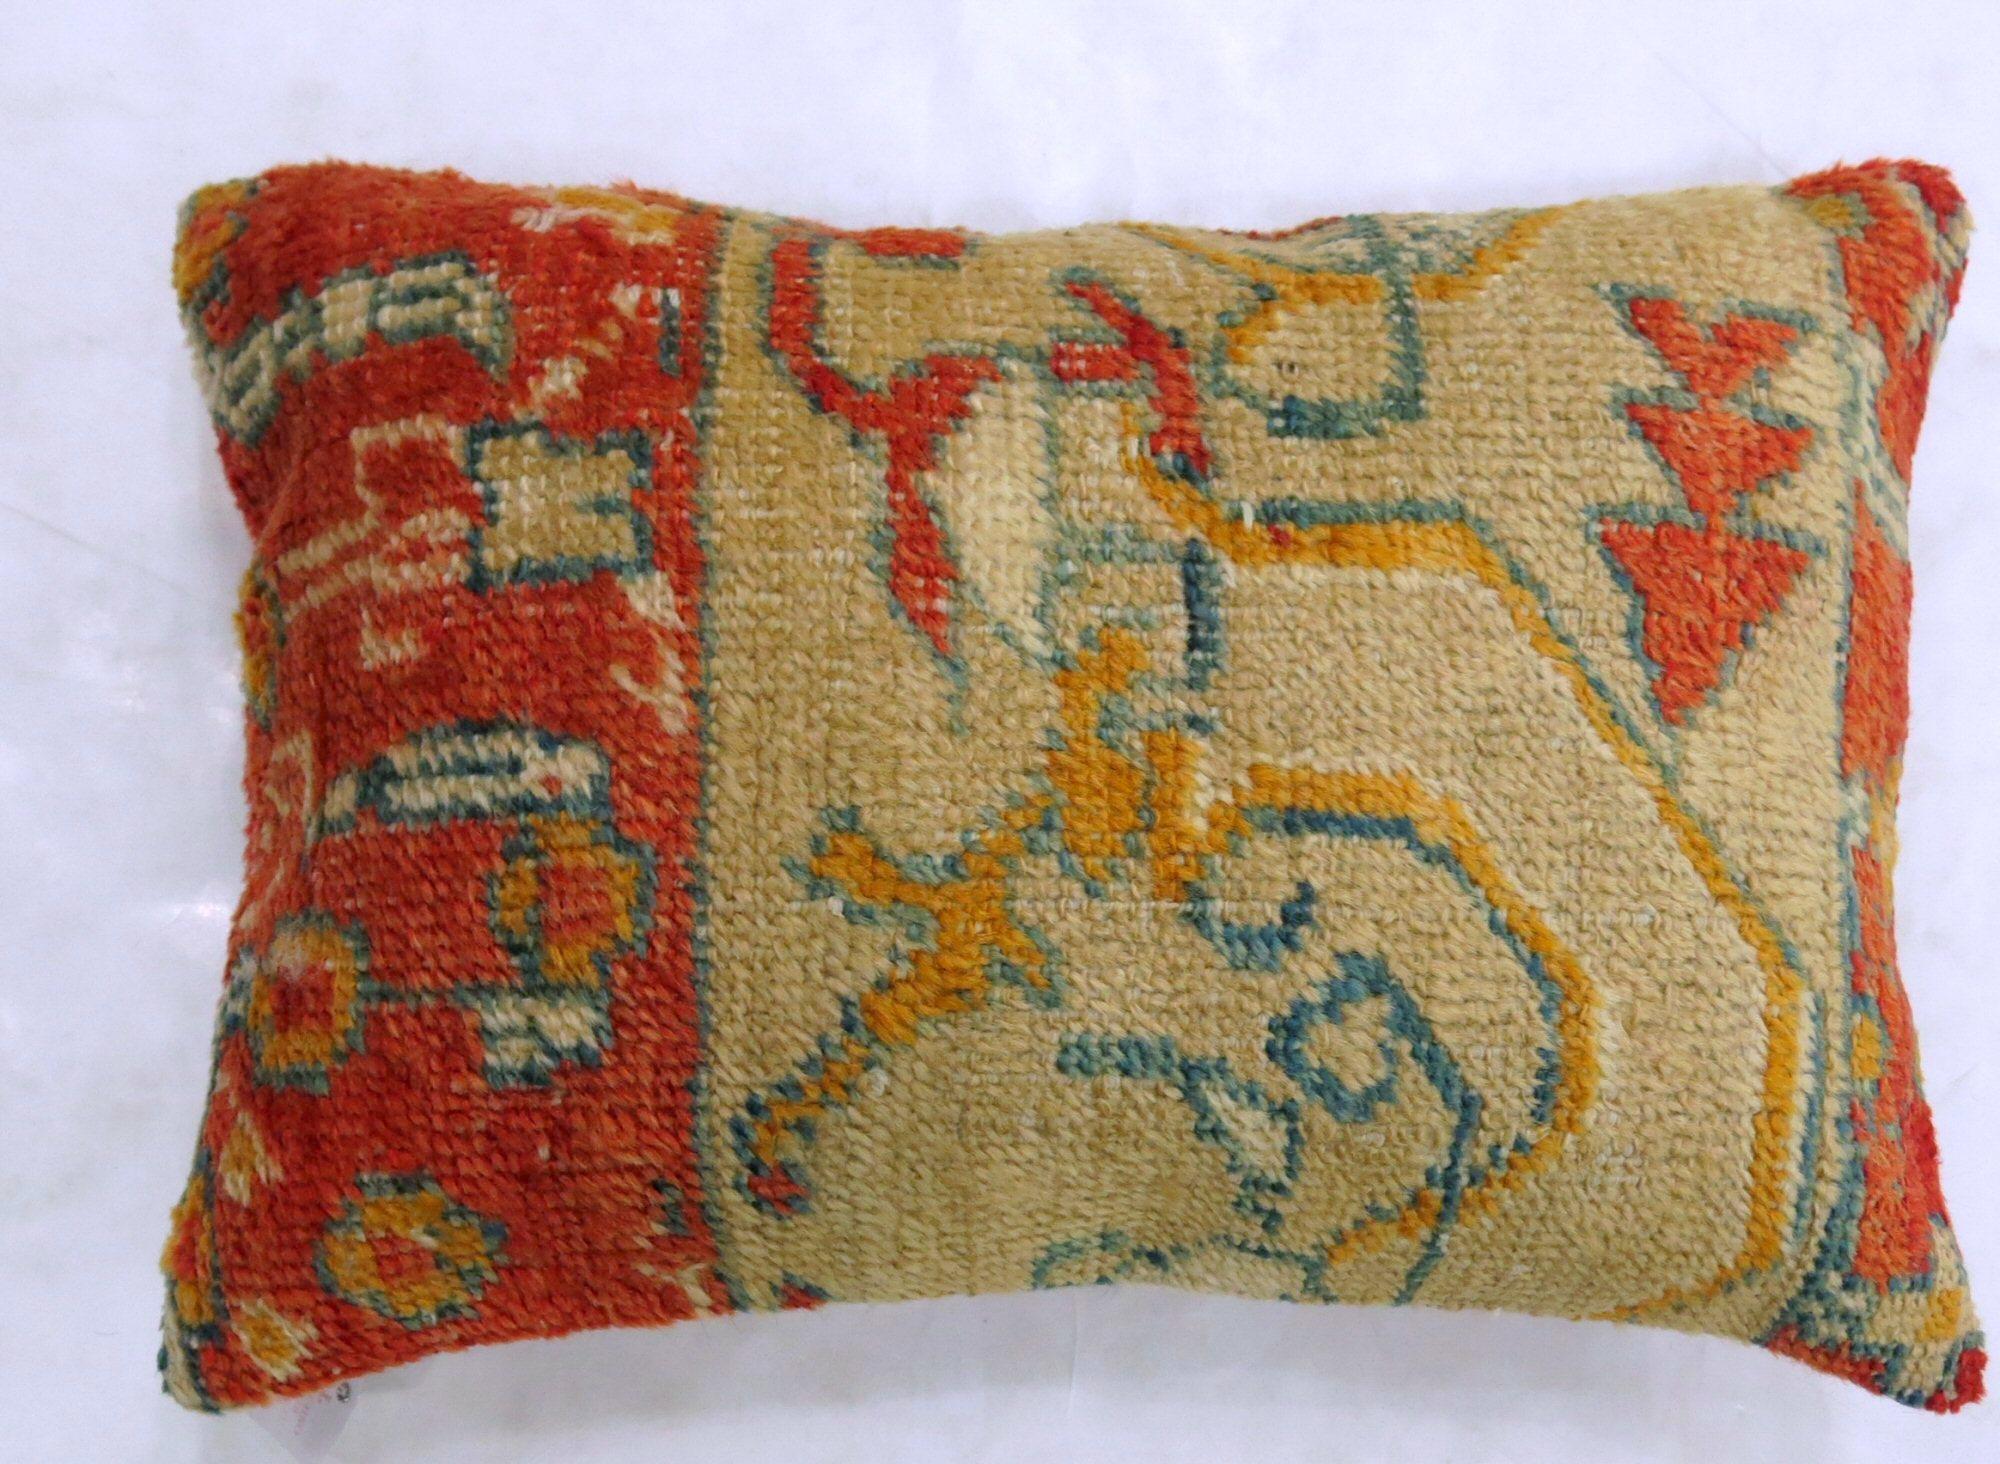 Pillow made from an early 20th century coral and camel color antique Oushak rug

Measures: 16